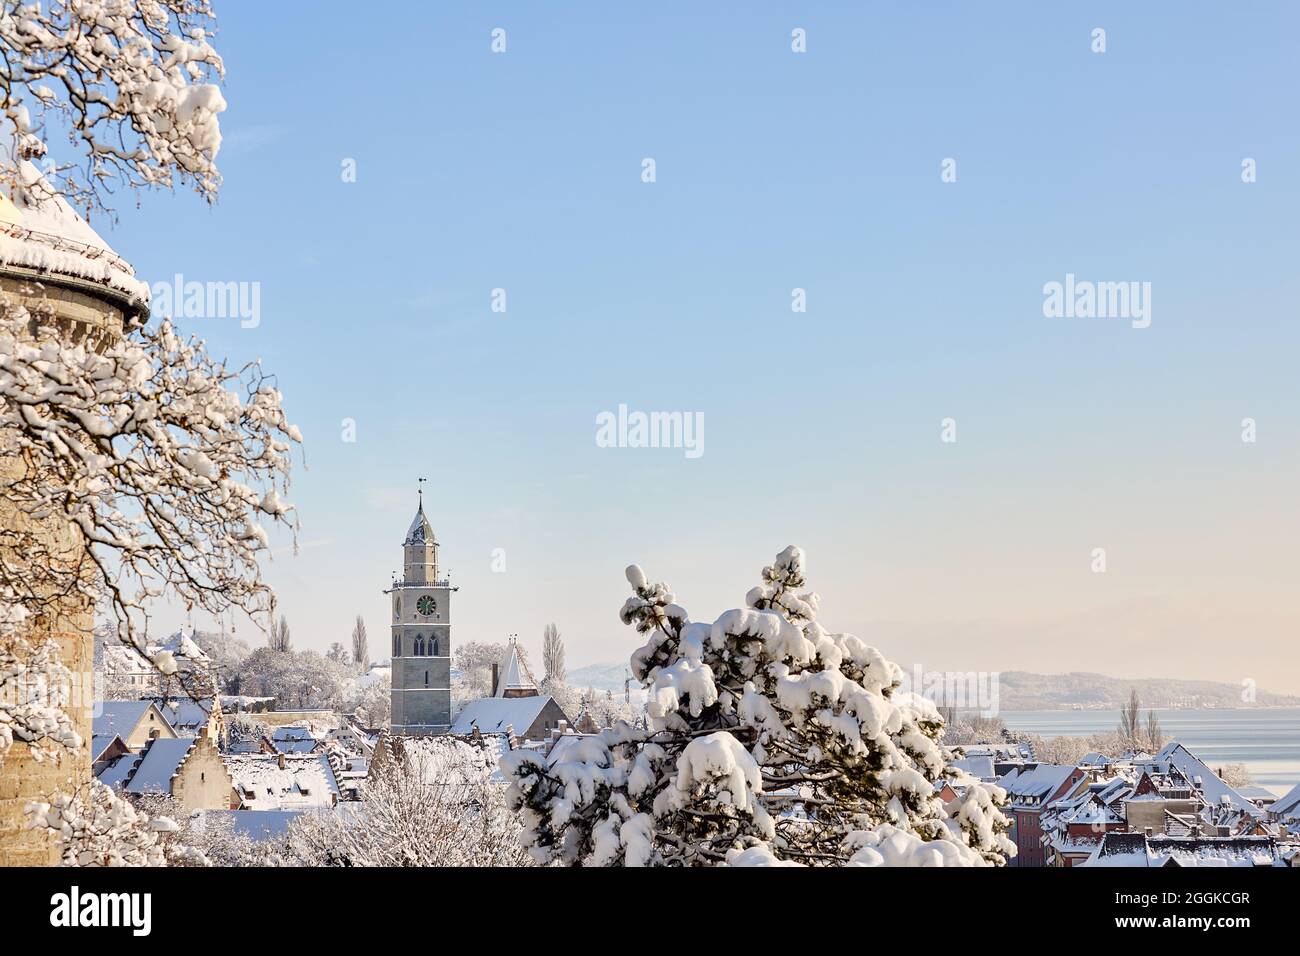 Germany, Baden-Wuerttemberg, Lake Constance, Überlingen on Lake Constance, winter landscape, view from the city park towards St. Nikolaus Minster Stock Photo